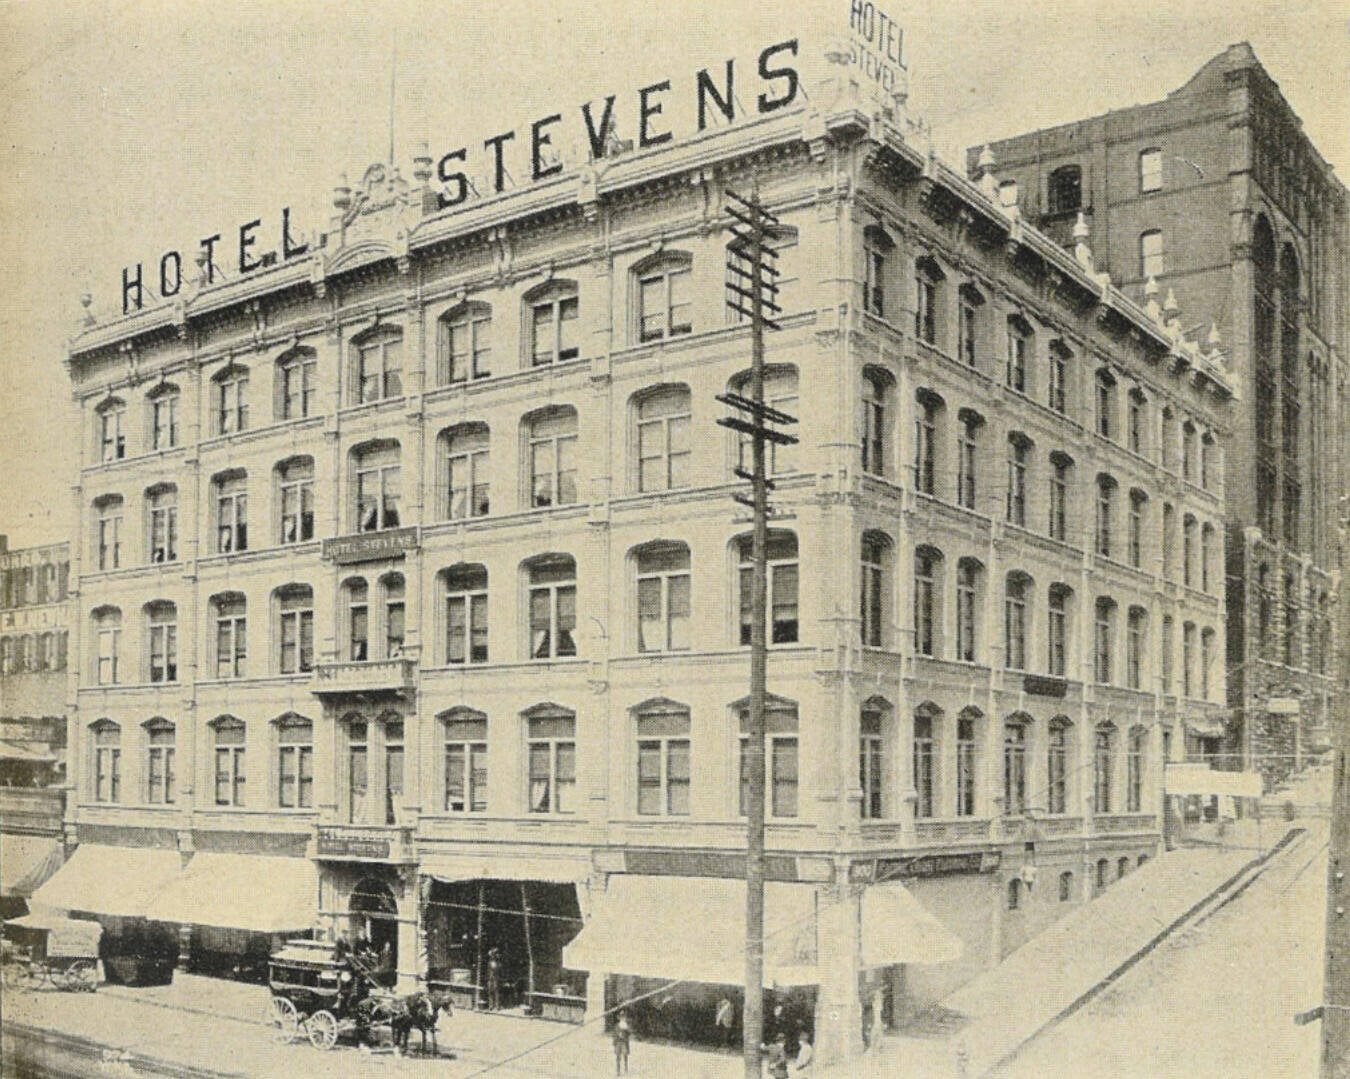 Frenchy often spent considerable time visiting family and conducting business in the Pacific Northwest. In Seattle, his favorite place to stay was the Hotel Stevens, and many of his letters were written on hotel stationery. (Image from Wikipedia)